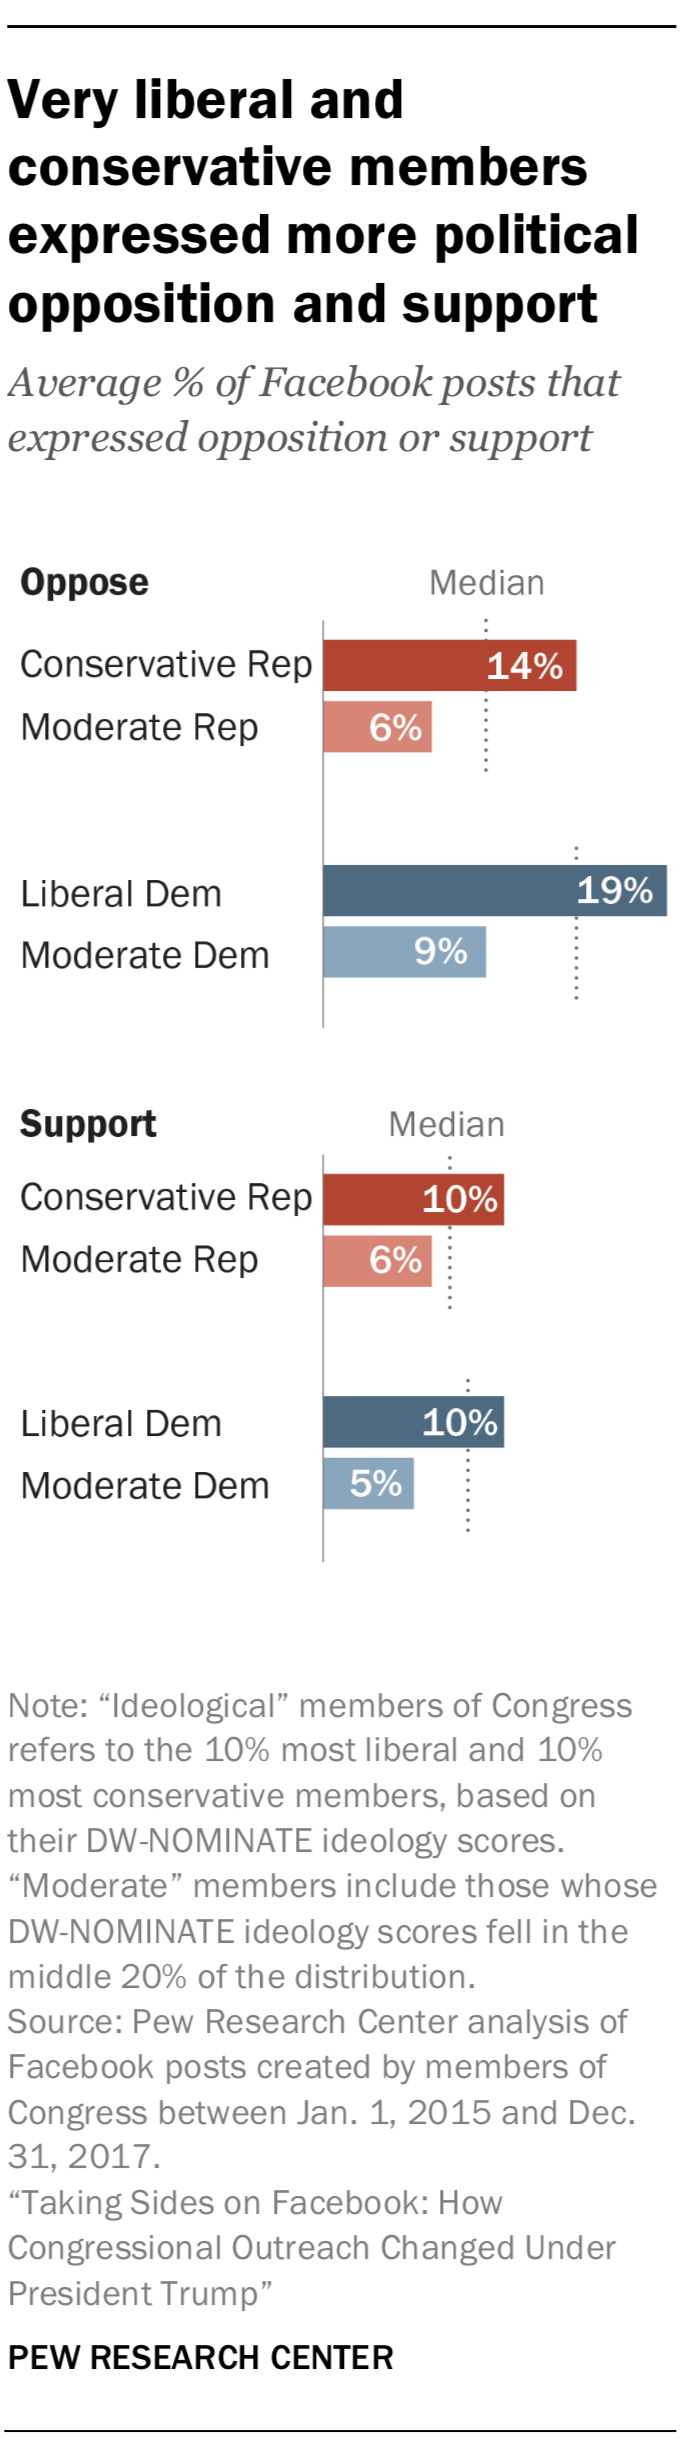 Very liberal and conservative members expressed more political opposition and support